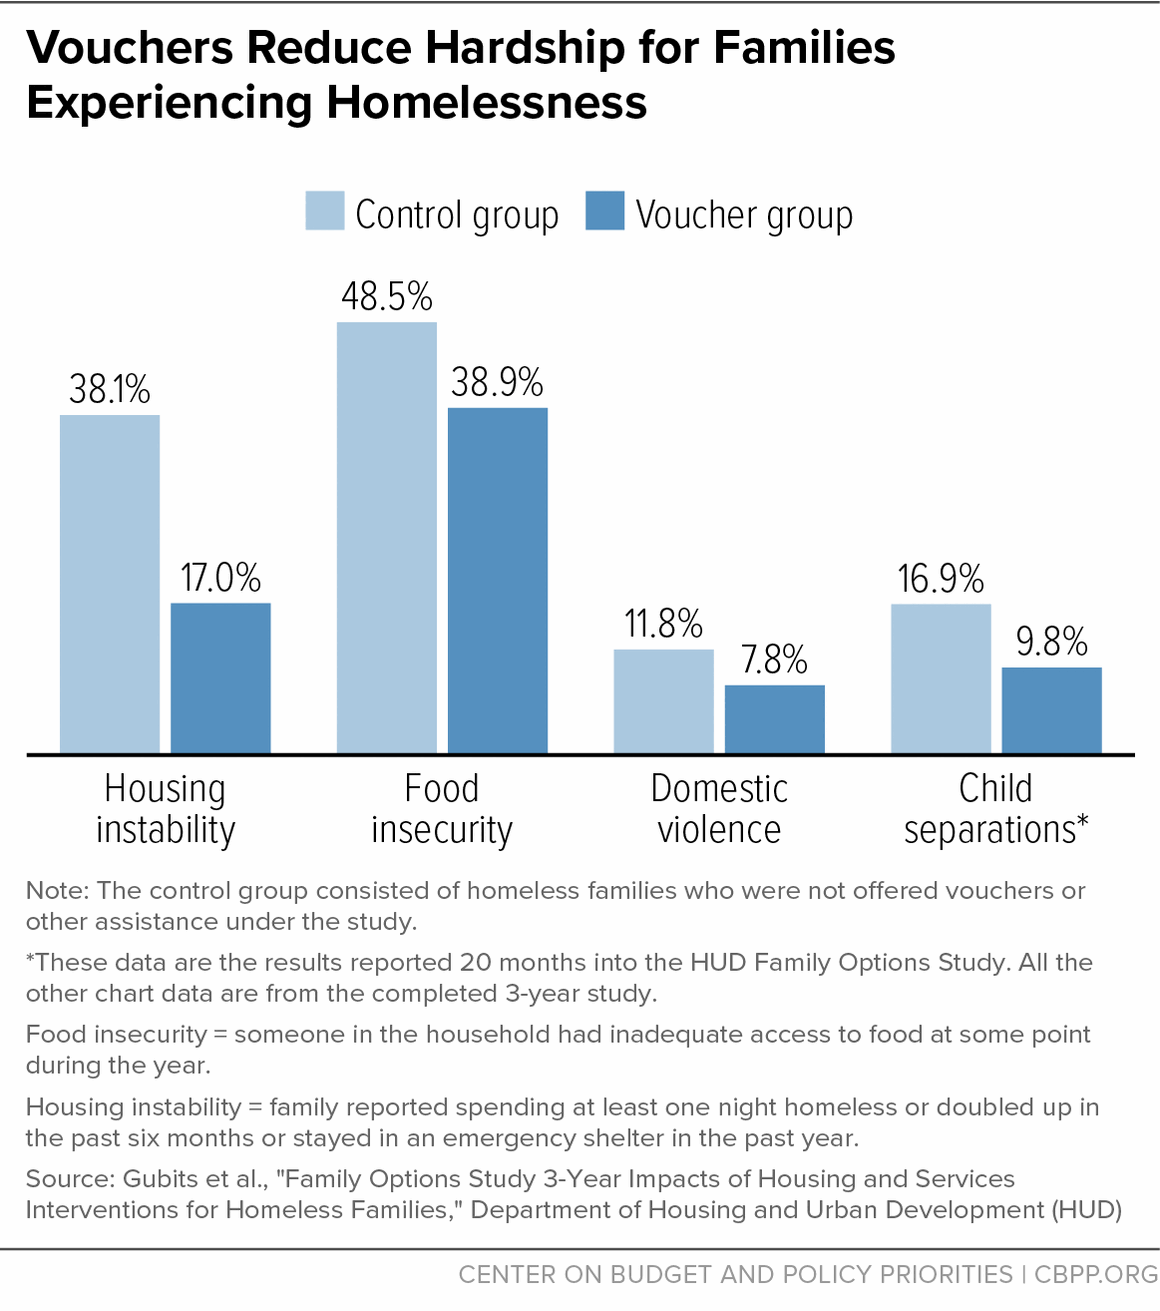 Vouchers Reduce Hardship for Families Experiencing Homelessness